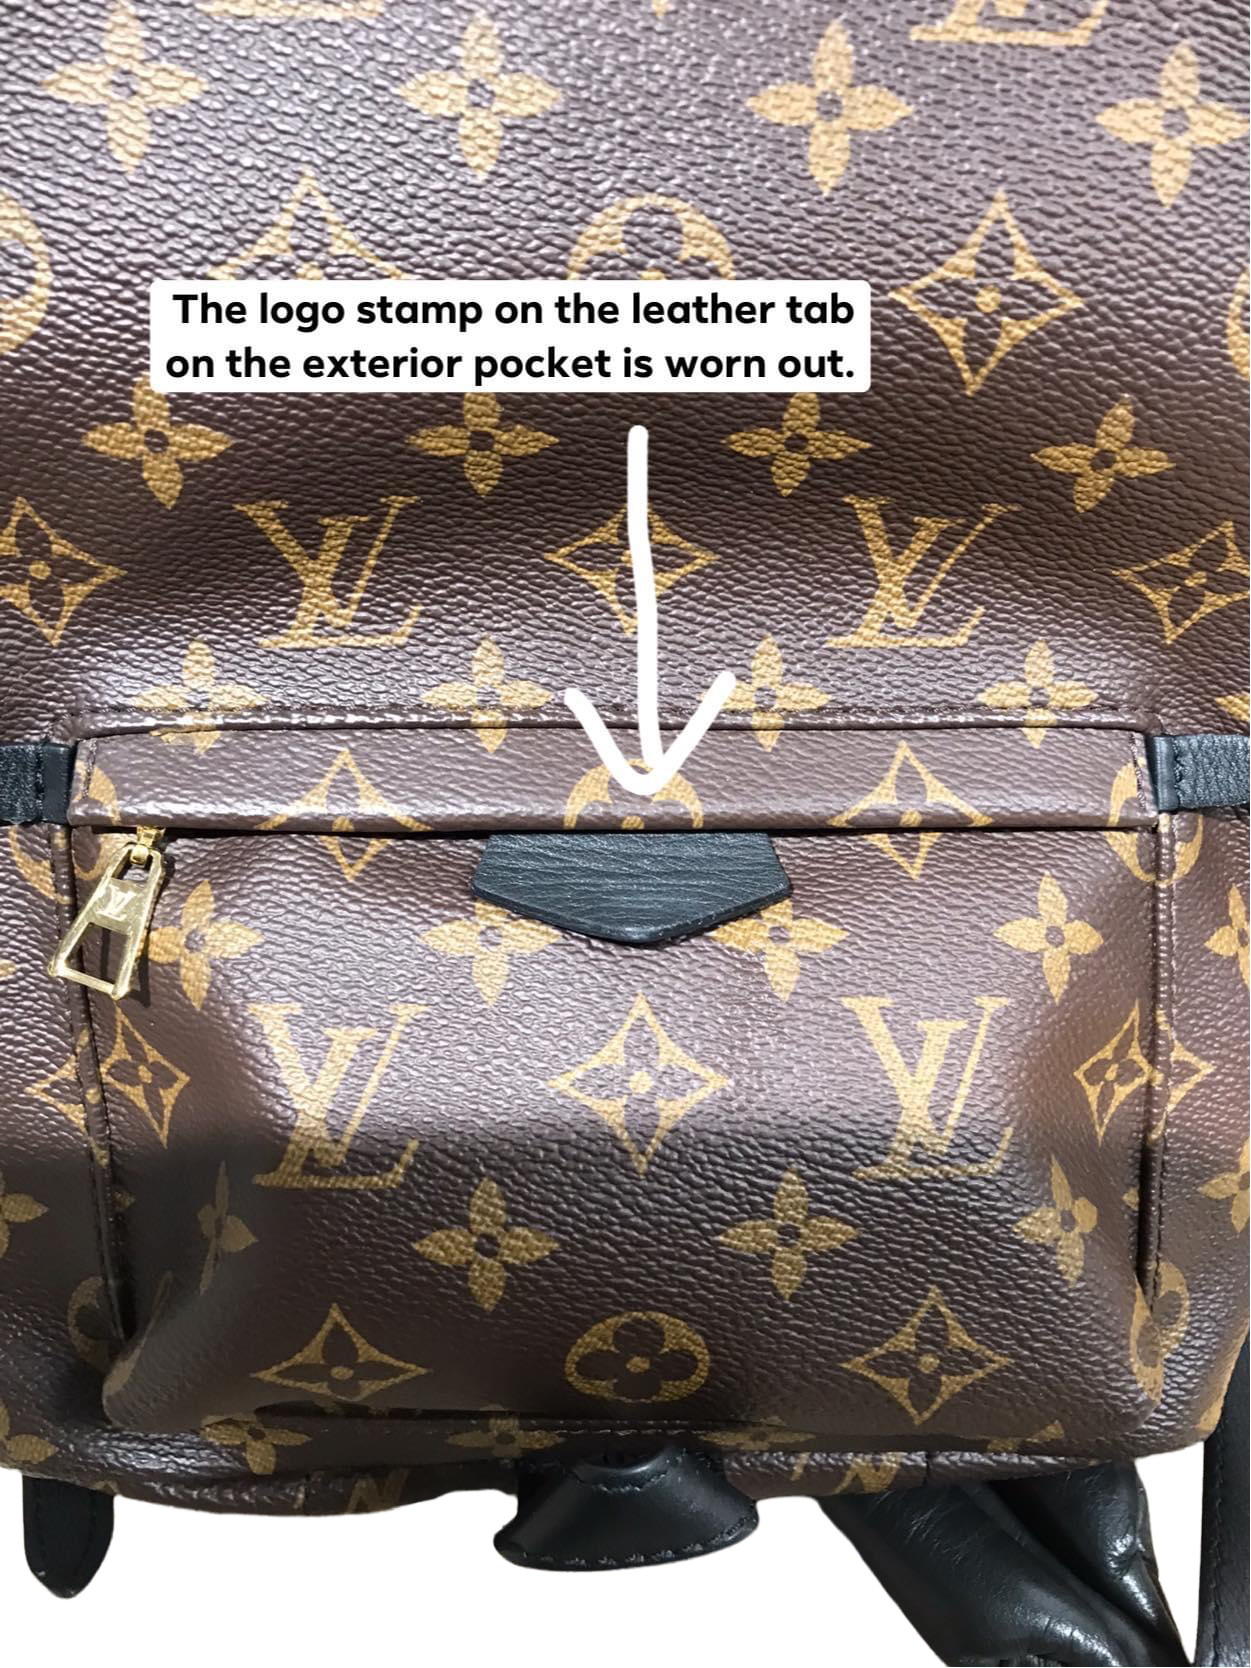 Palm Spring PM, Used & Preloved Louis Vuitton Backpack